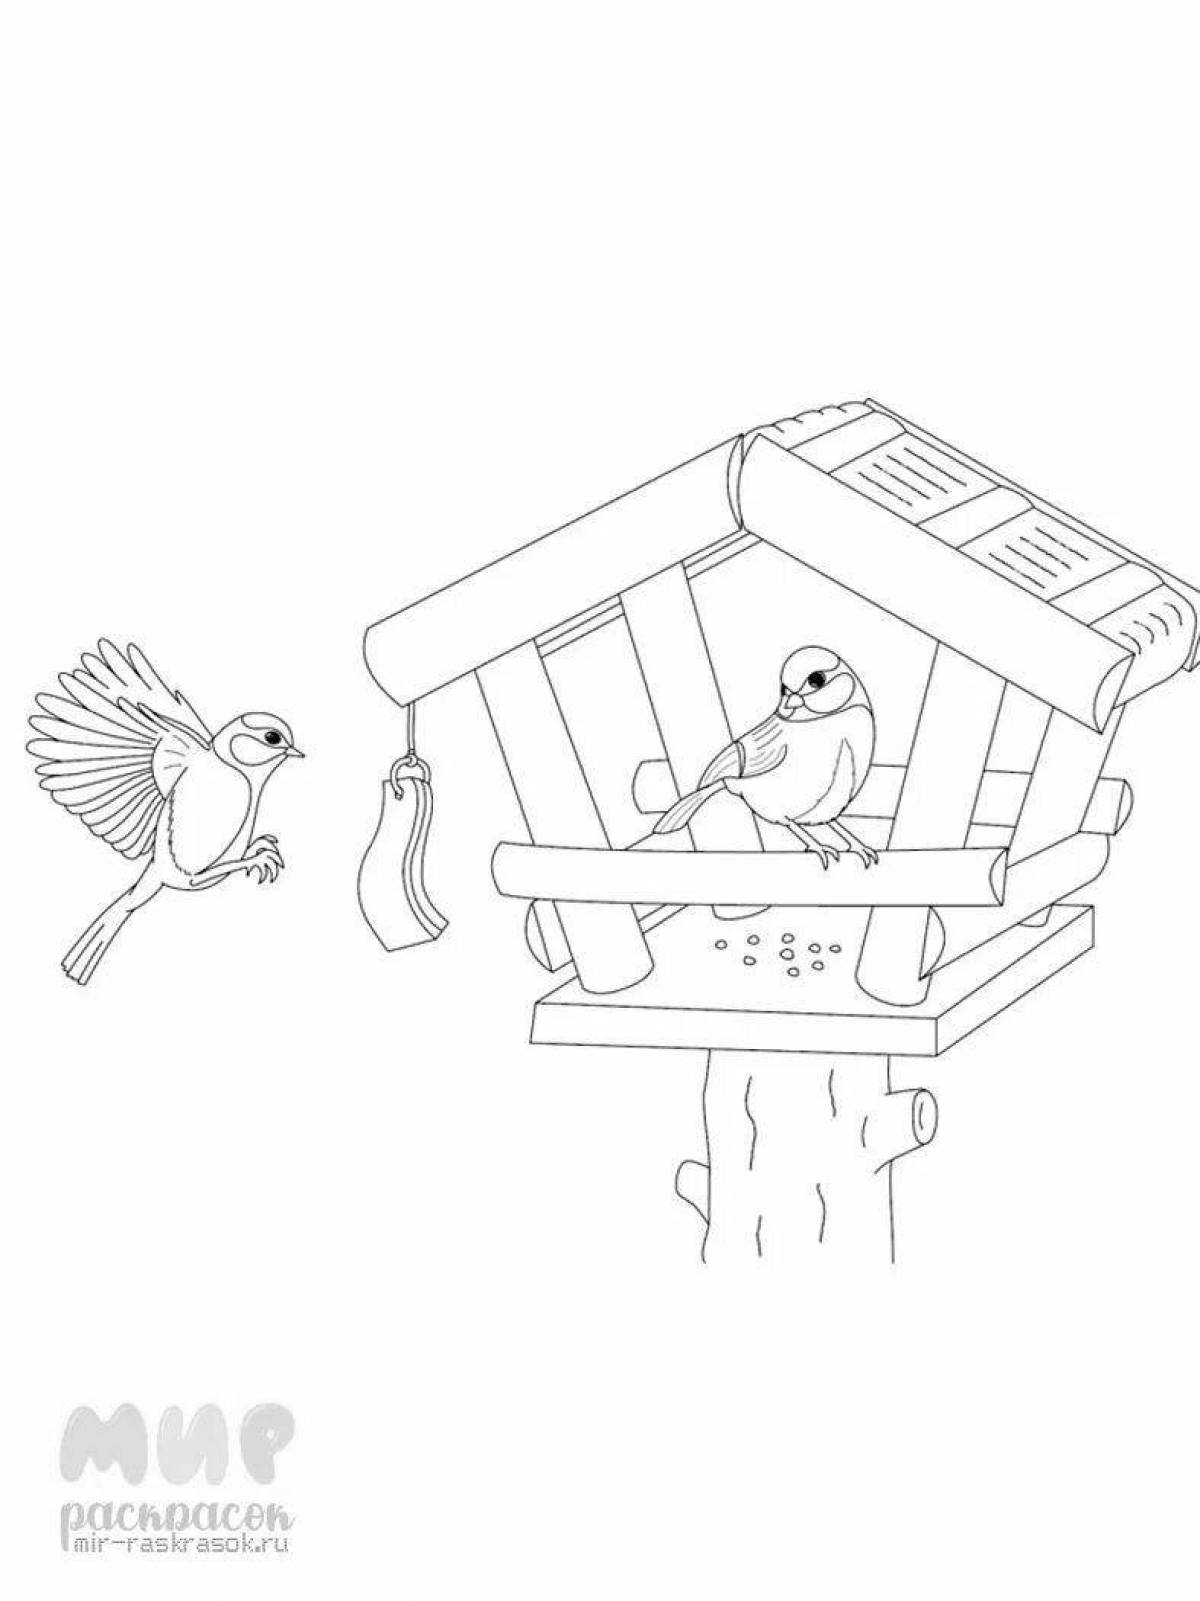 Gorgeous bird feeder coloring book for kids